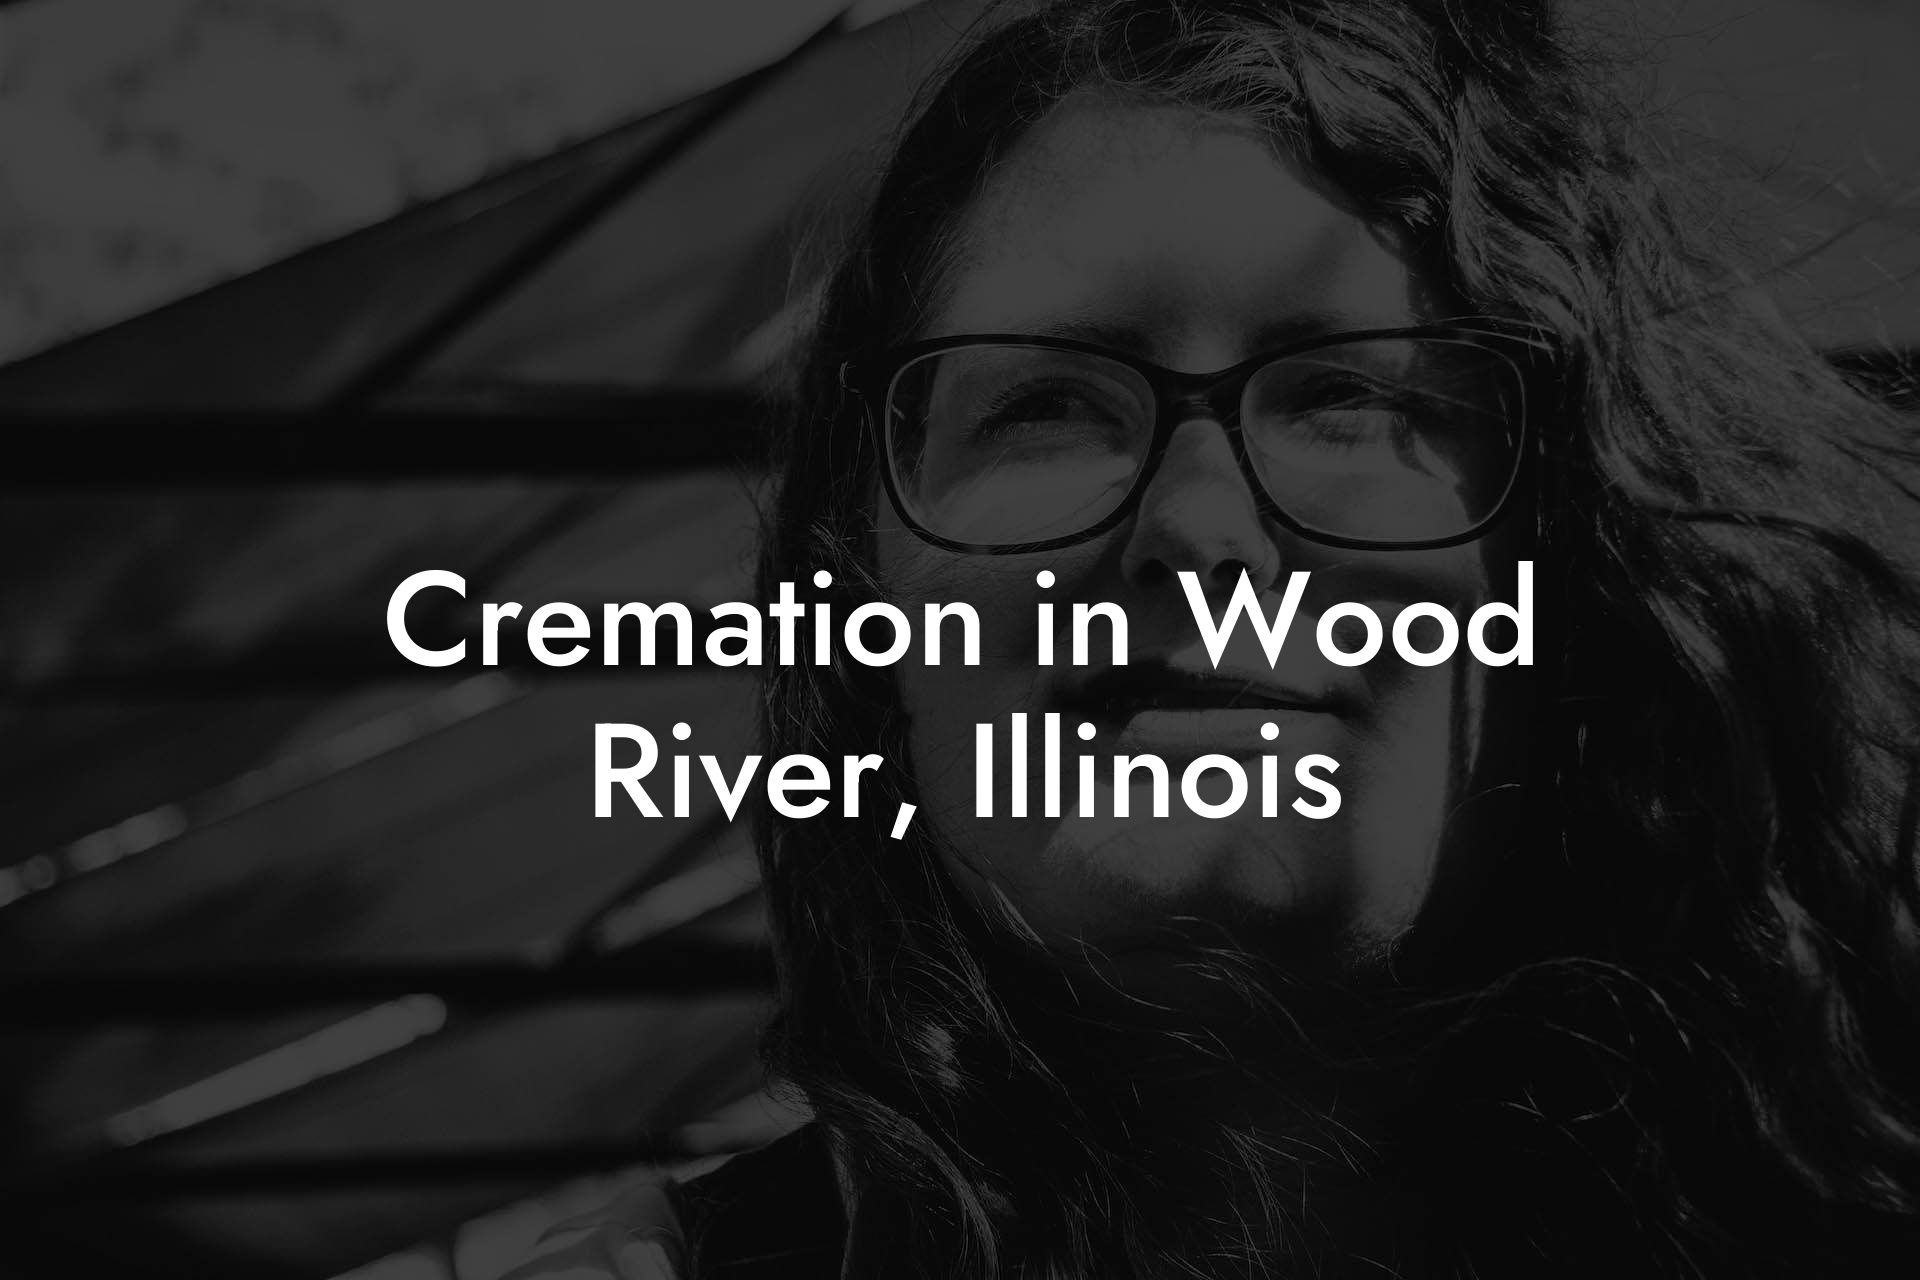 Cremation in Wood River, Illinois